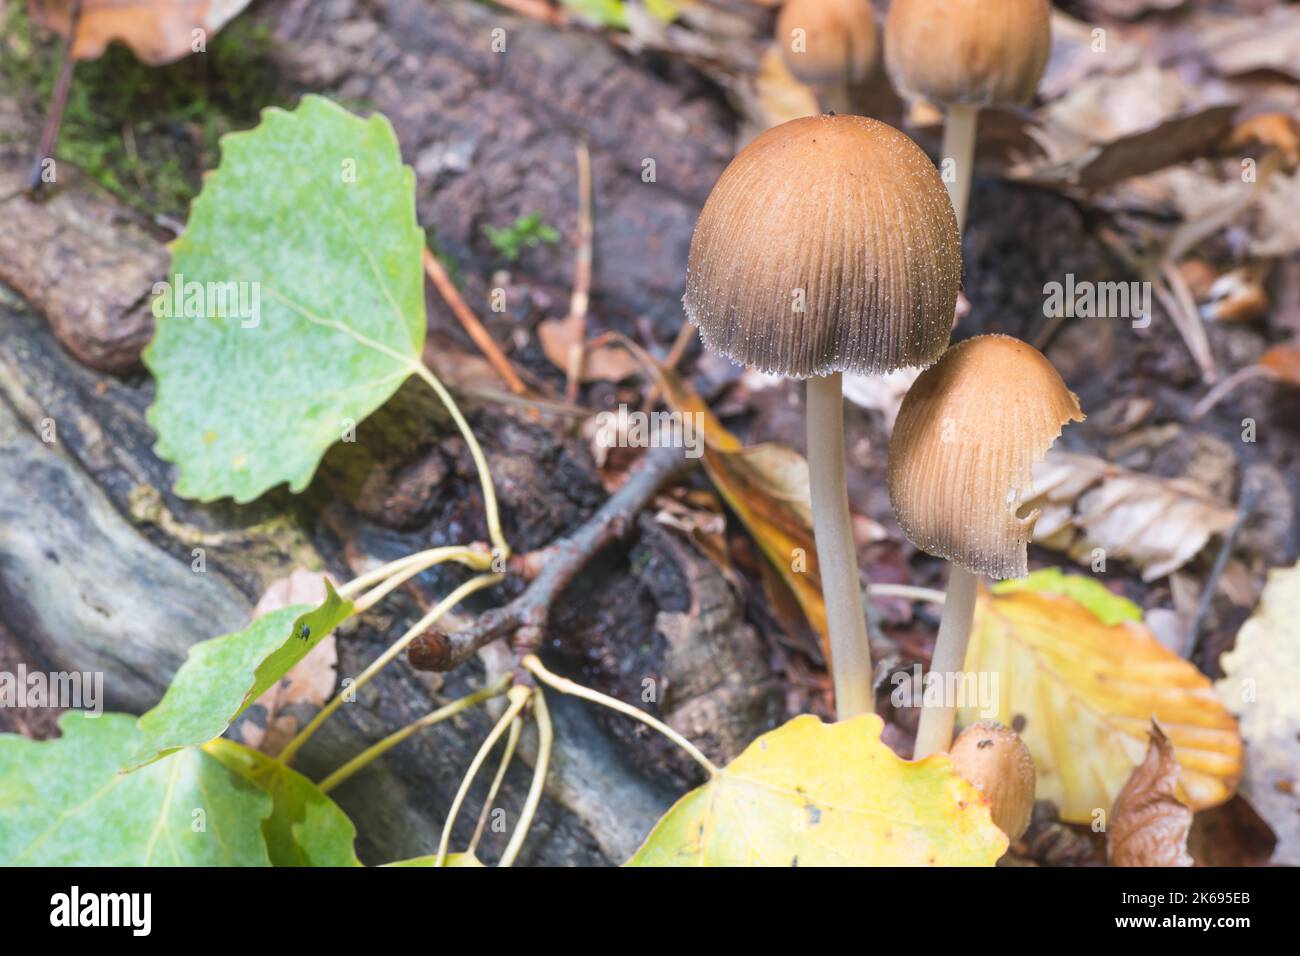 Coprinellus truncorum commonly mushroom forming fungus in the autumn forest. Species related to Coprinellus micaceus in English mica cap or shiny cap. Stock Photo